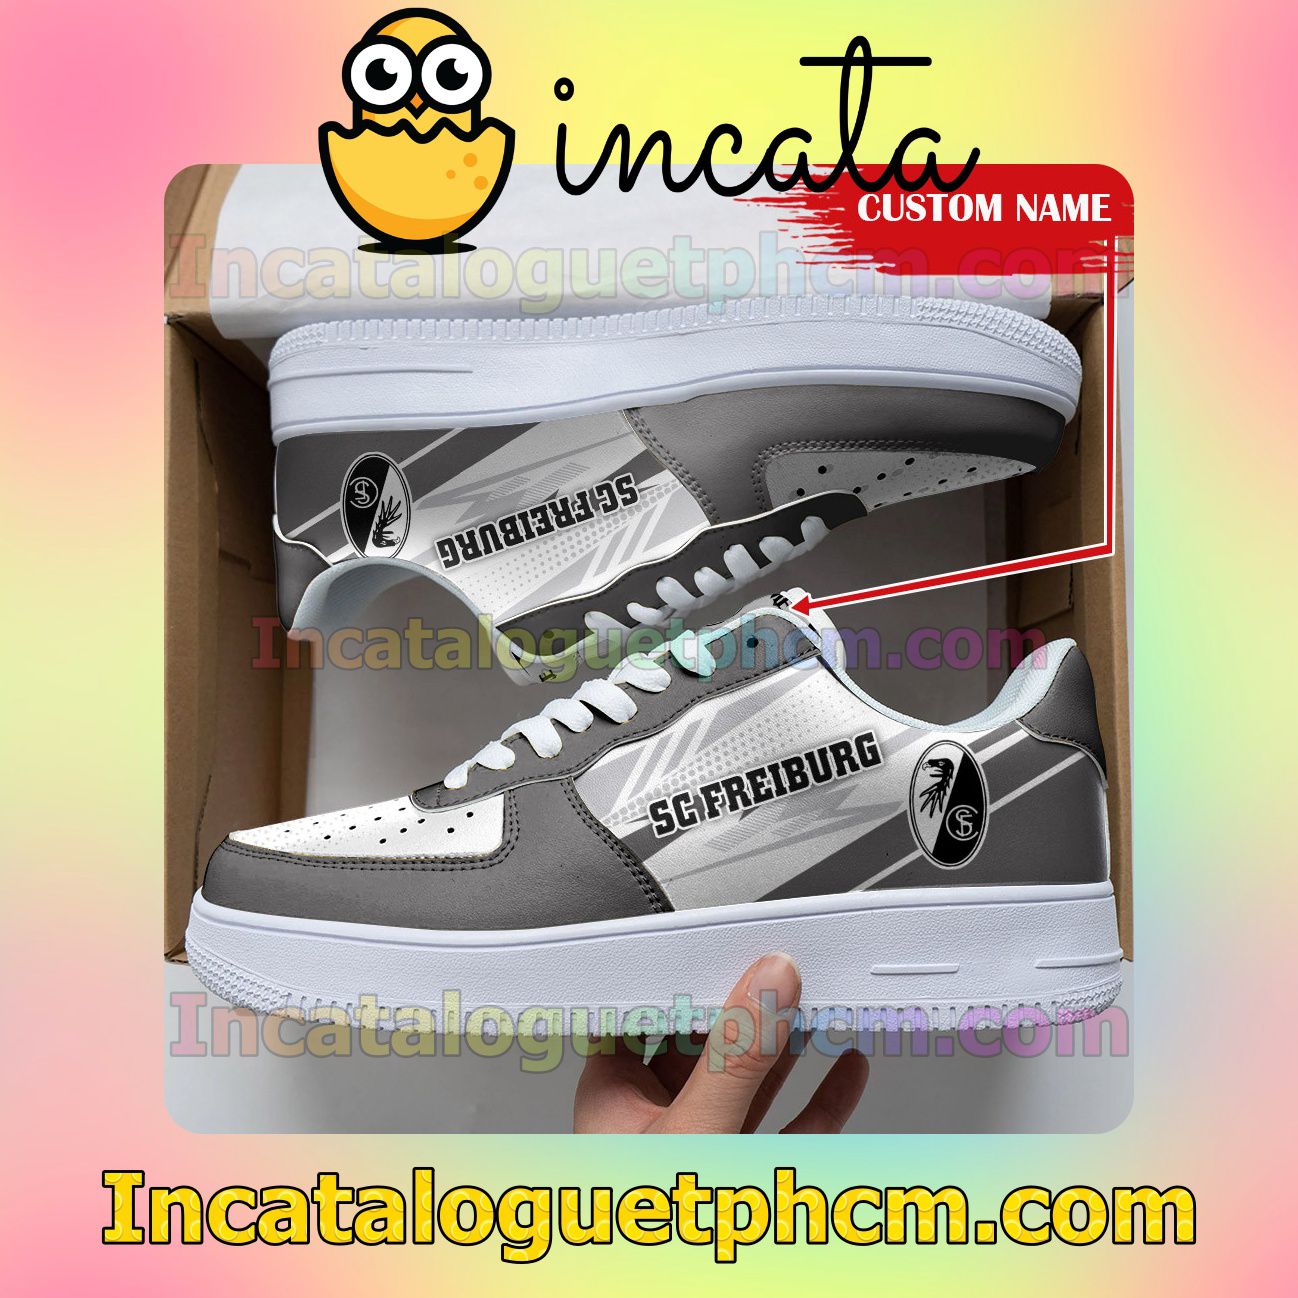 Only For Fan Personalized Bundesliga SC Freiburg Custom Name Nike Low Shoes Sneakers